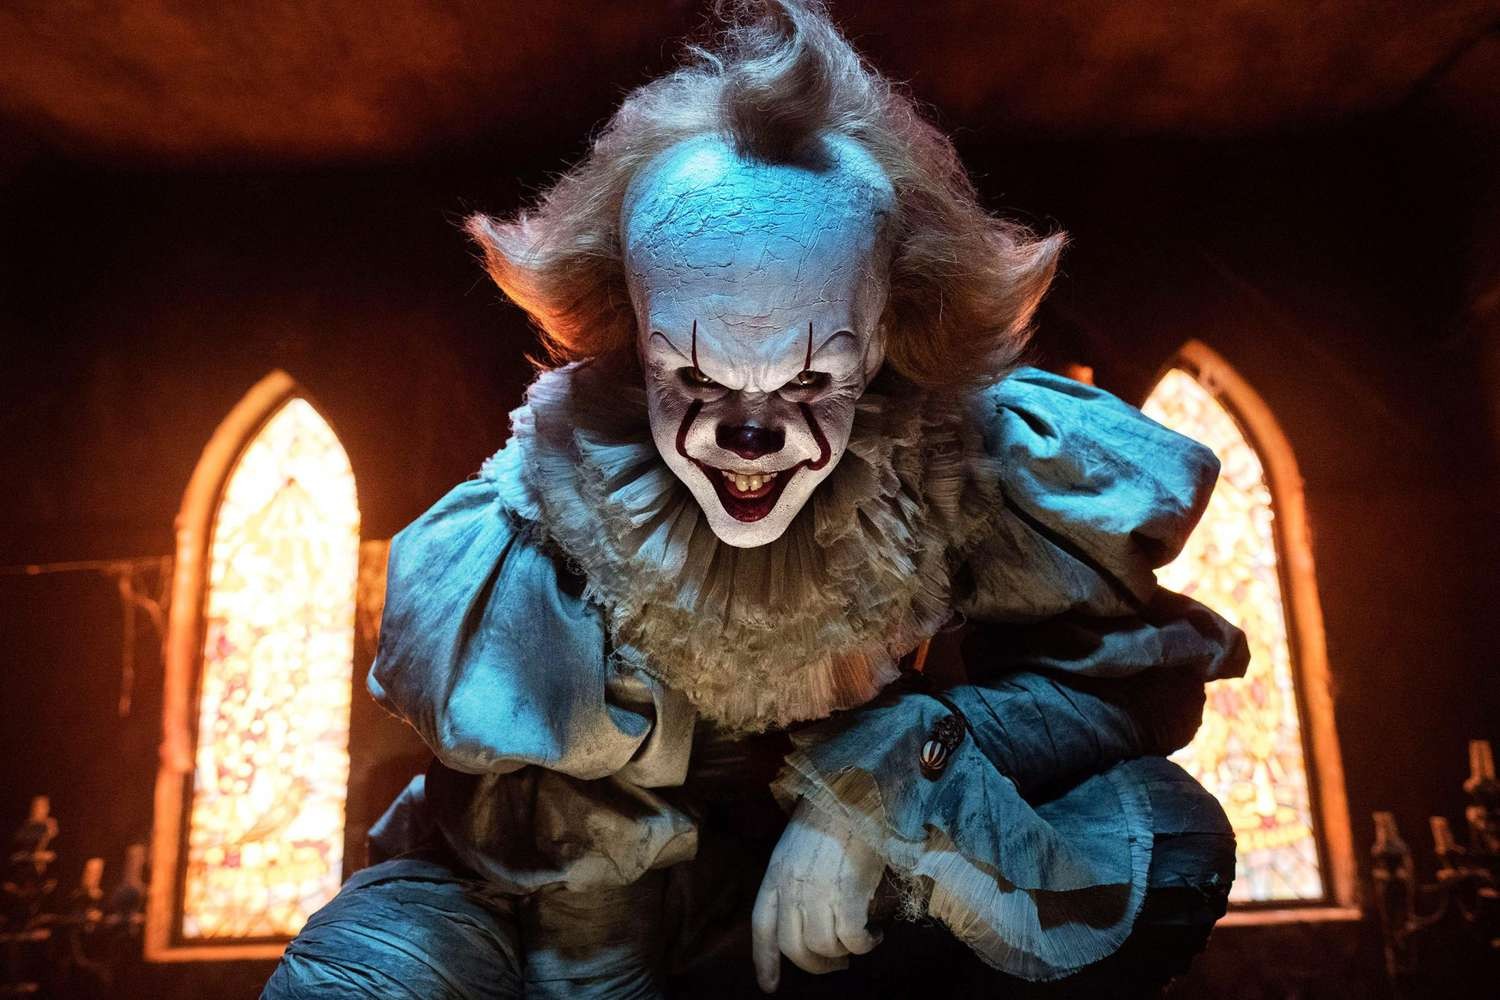 Bill Skarsgård as Pennywise in the It franchise